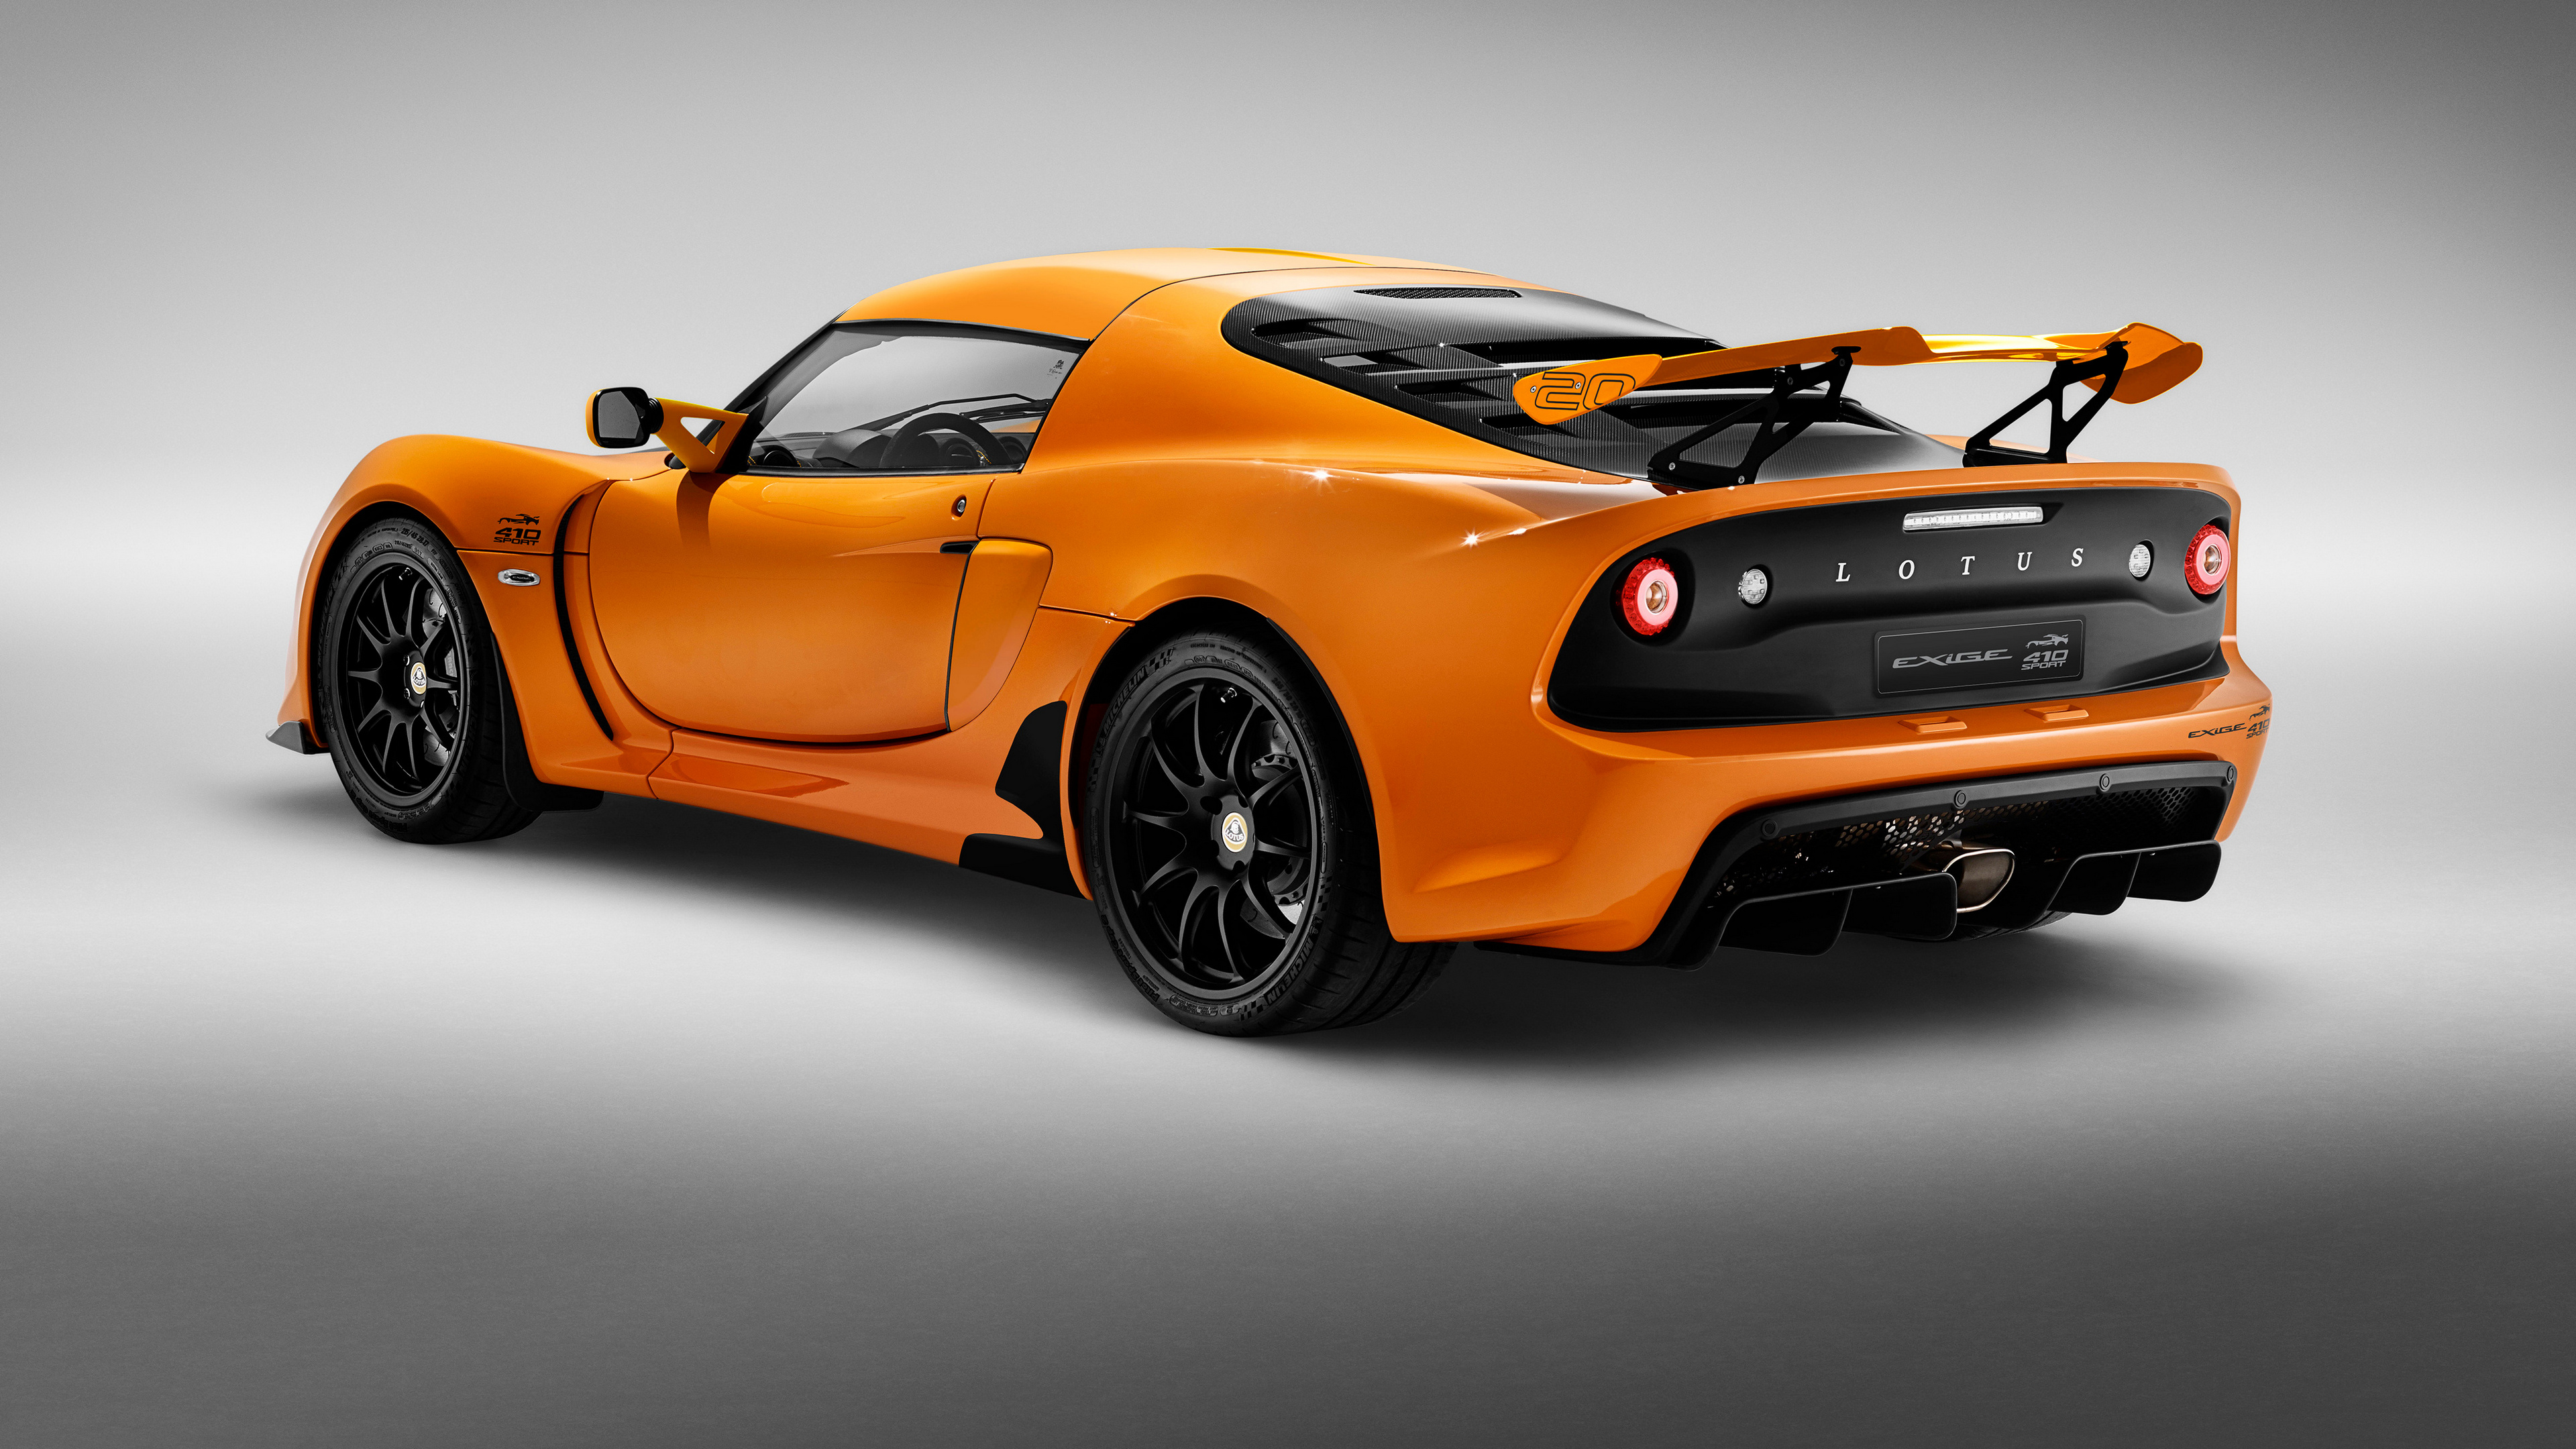 Free photo Orange lotus exige sport 410 rear view with lights on